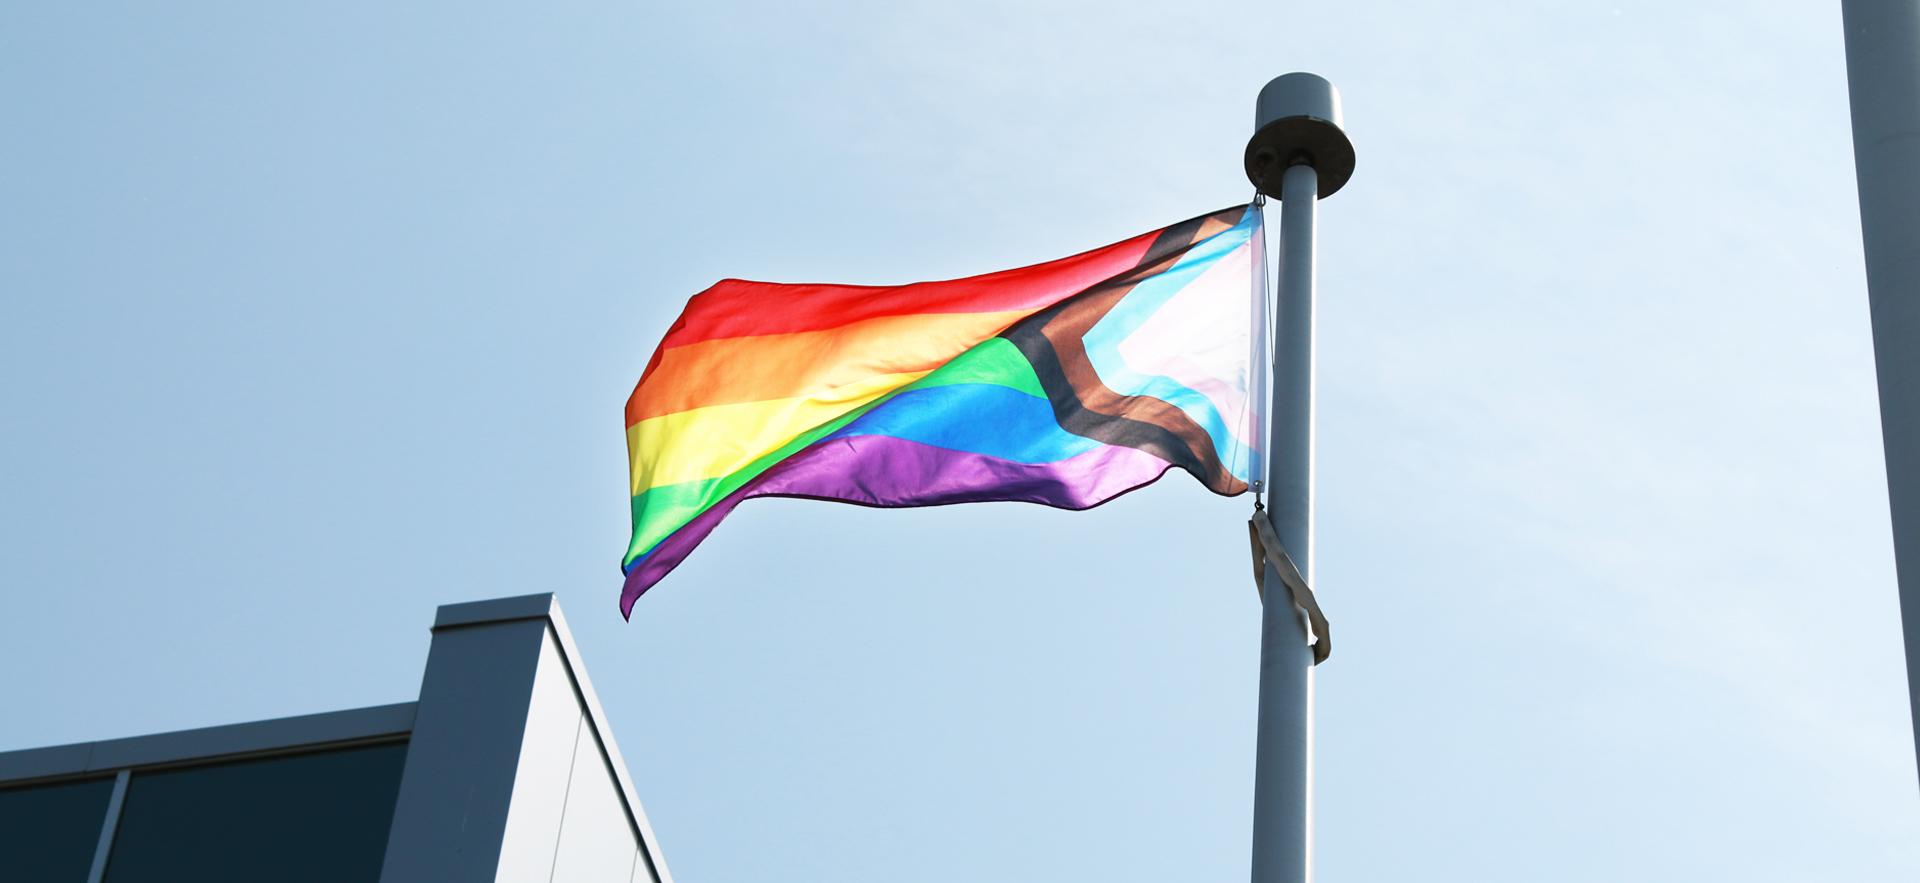 Pride flag shown moving in wind on flag post